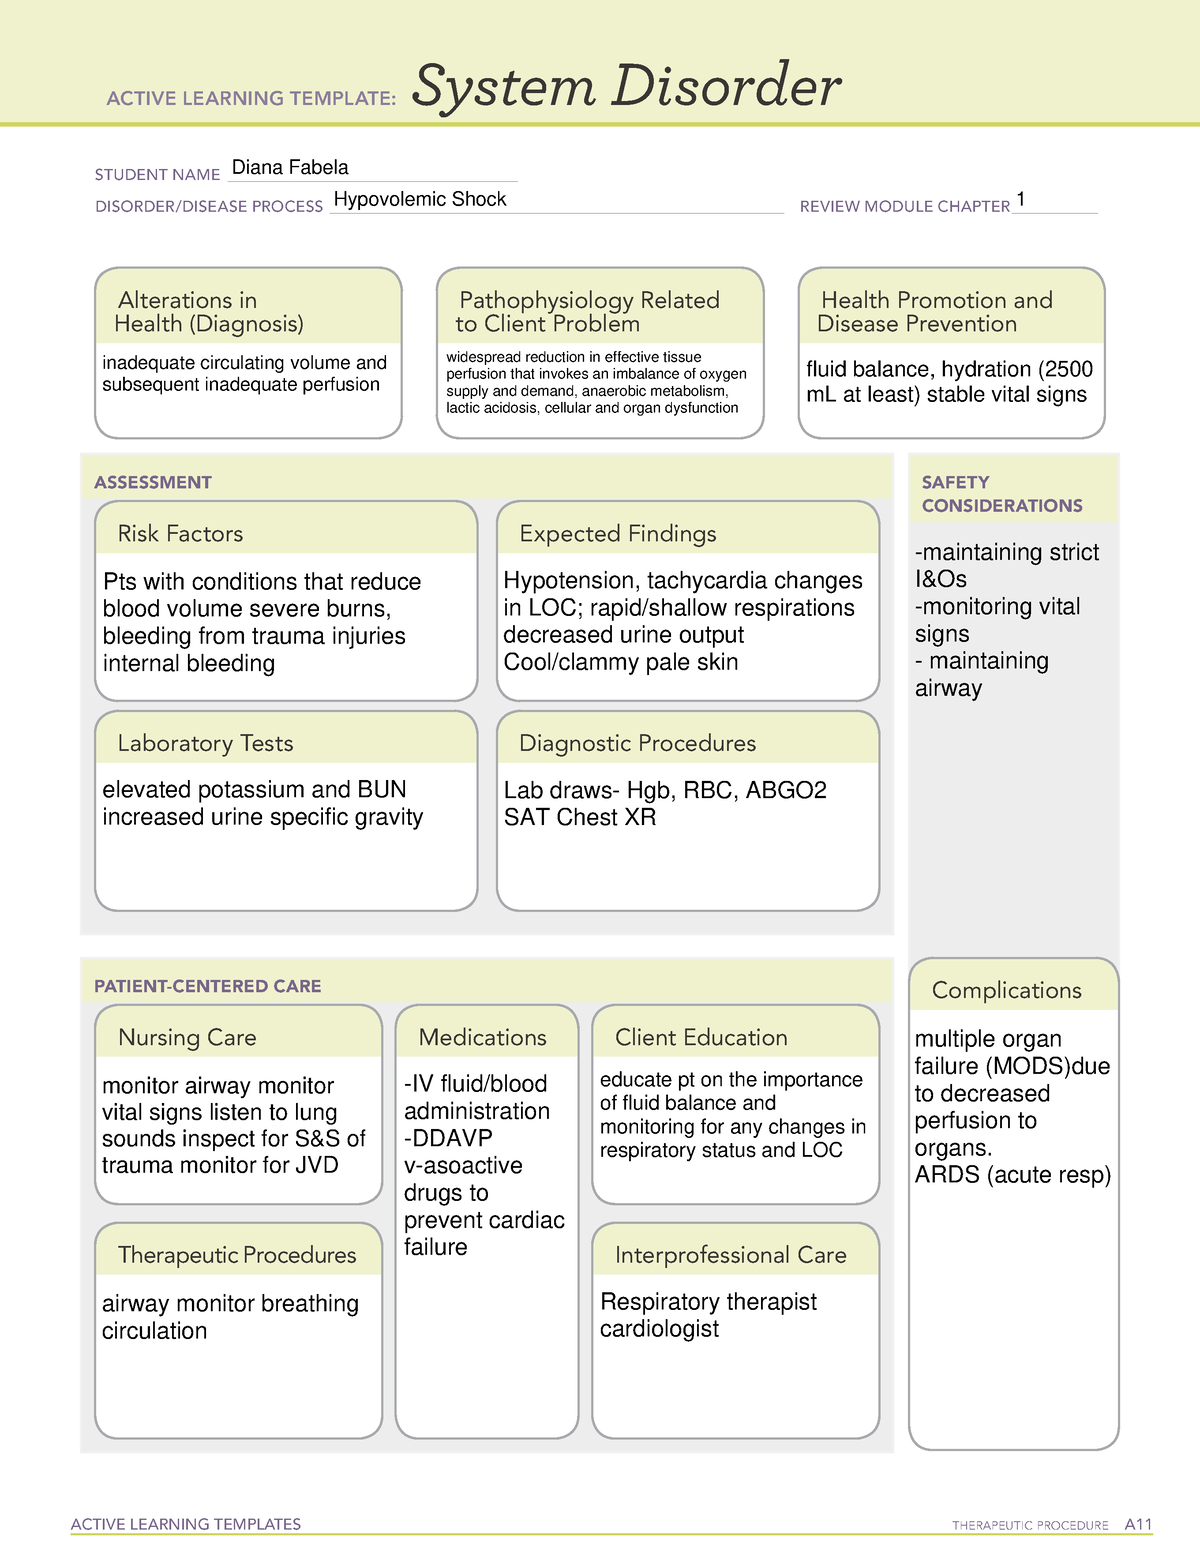 Active Learning Template Hypovolemic Shock - ACTIVE LEARNING TEMPLATES ...